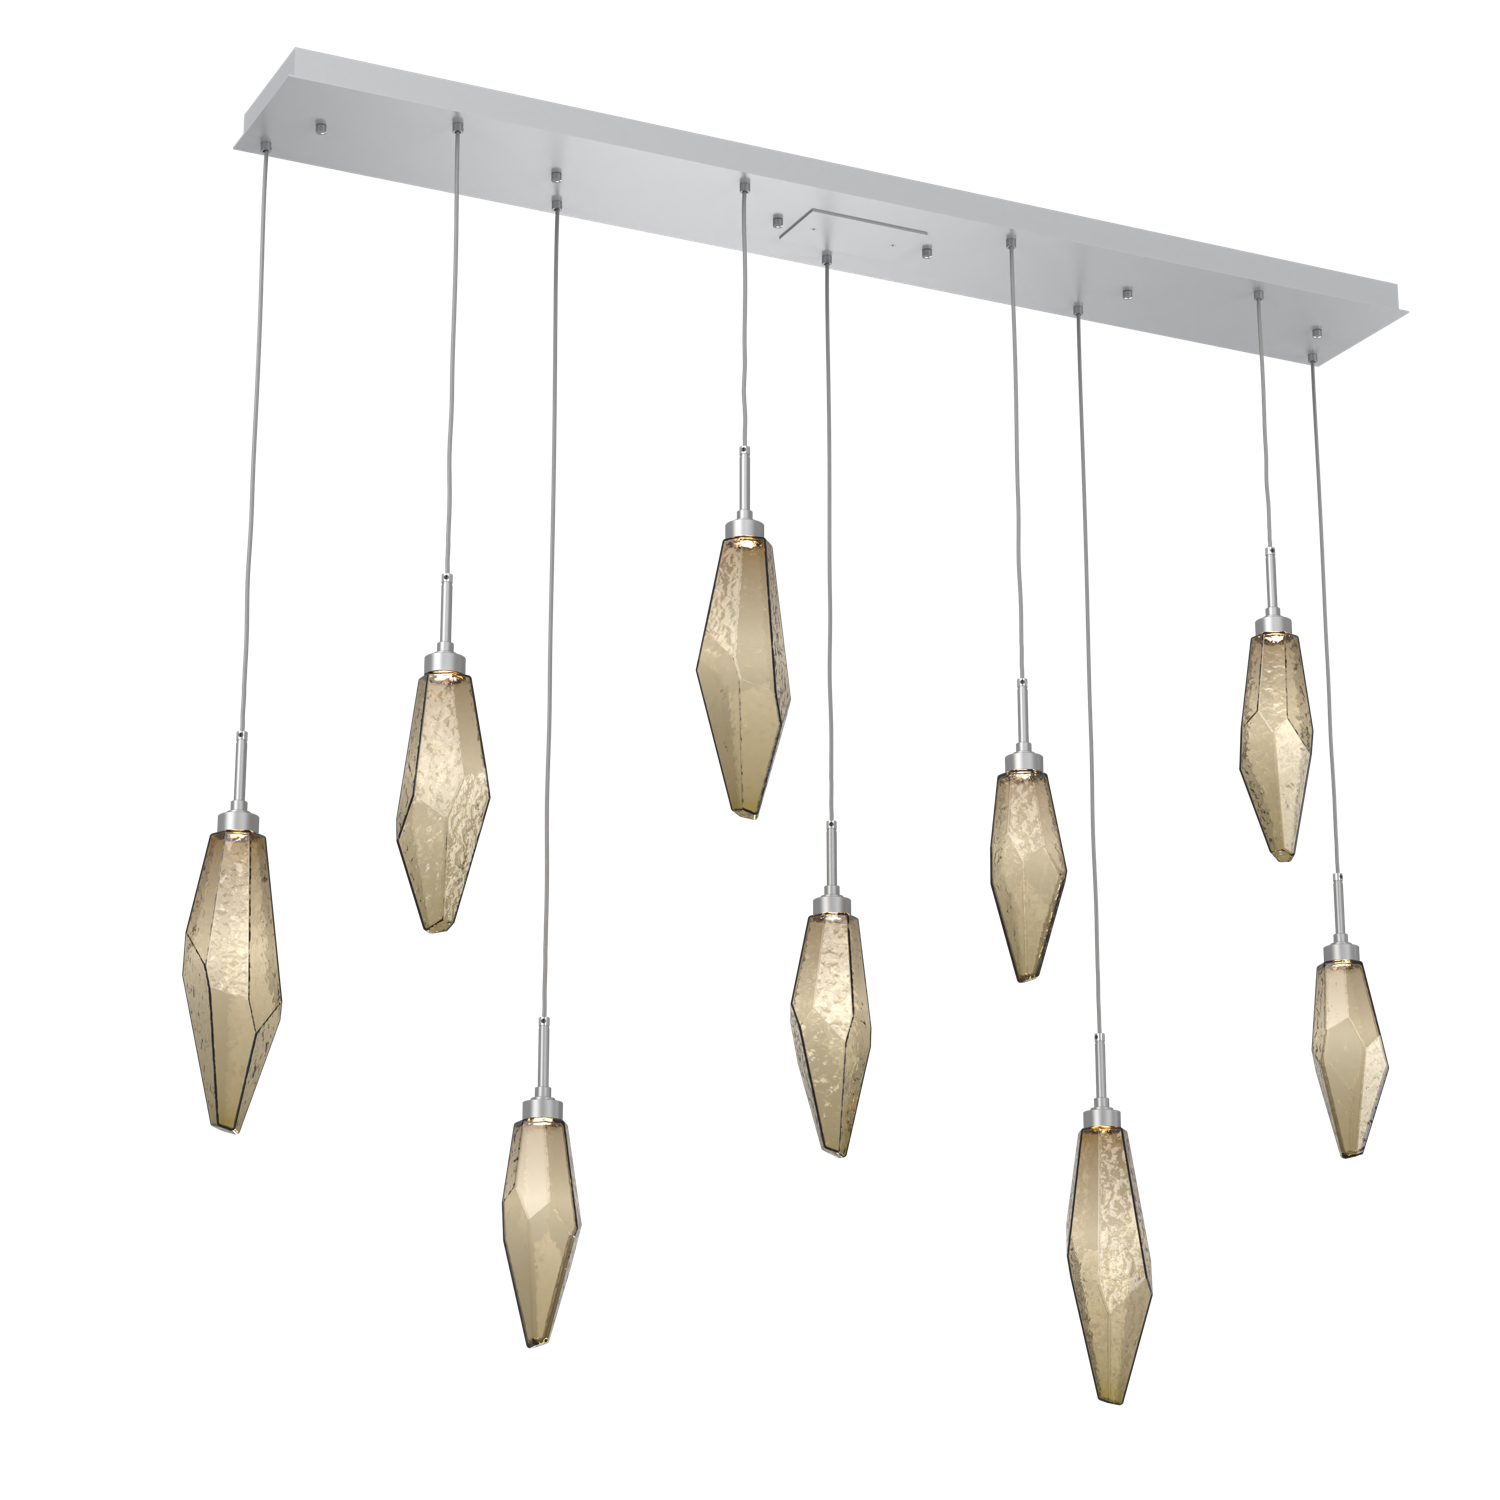 PLB0050-09-CS-CB-Hammerton-Studio-Rock-Crystal-9-light-linear-pendant-chandelier-with-classic-silver-finish-and-chilled-bronze-blown-glass-shades-and-LED-lamping